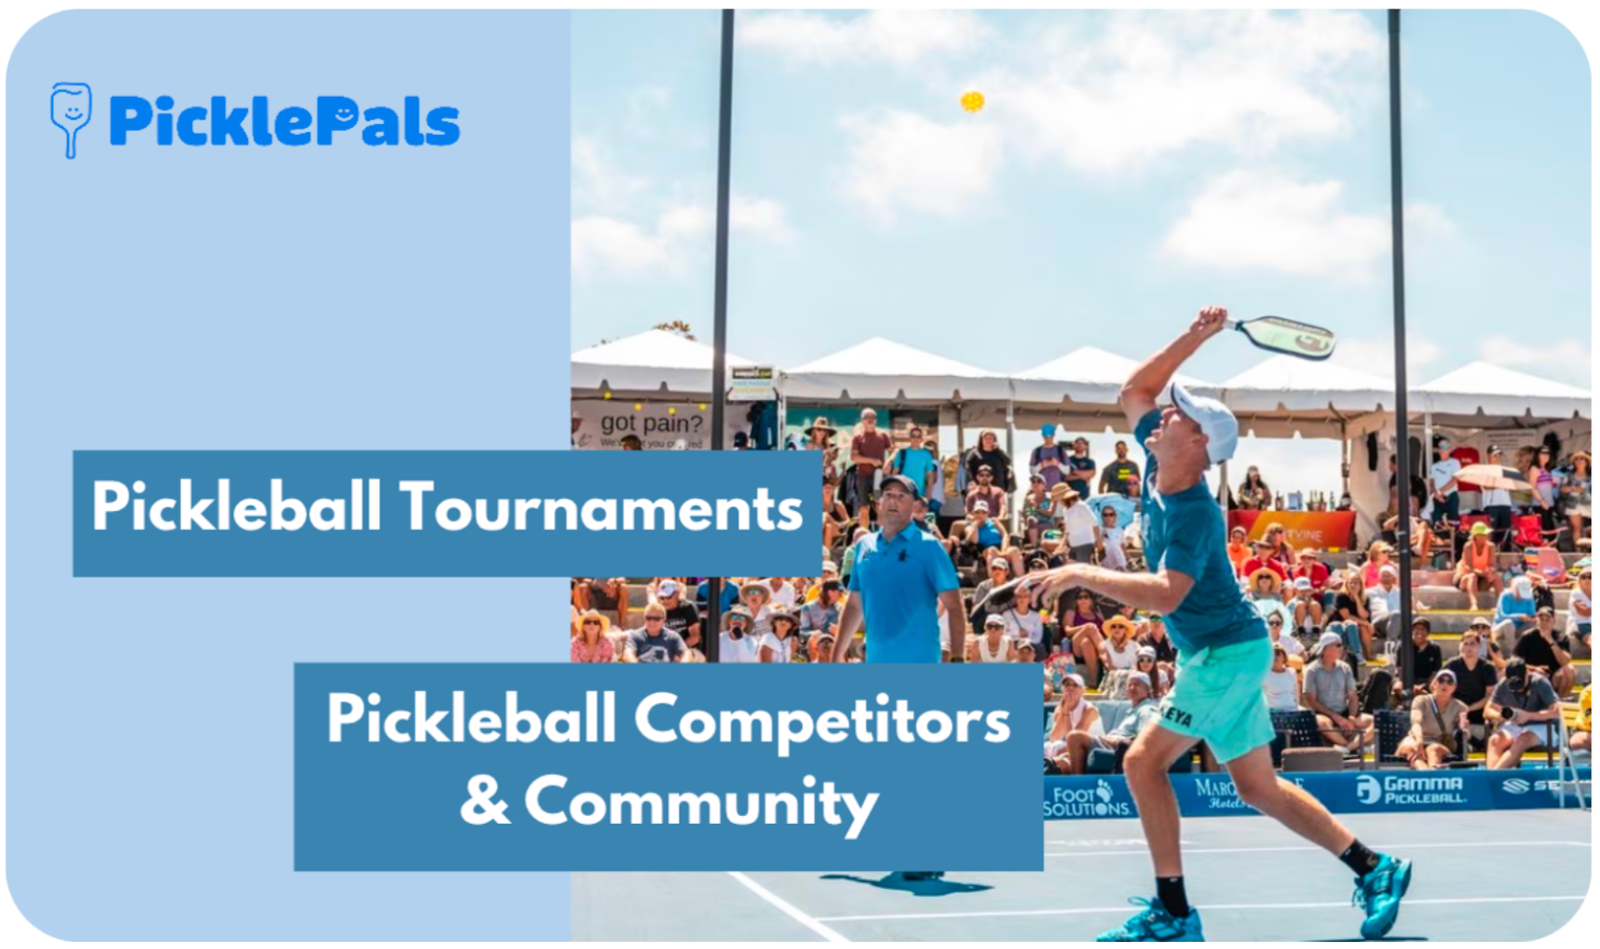 Pickleball Competitions & Community